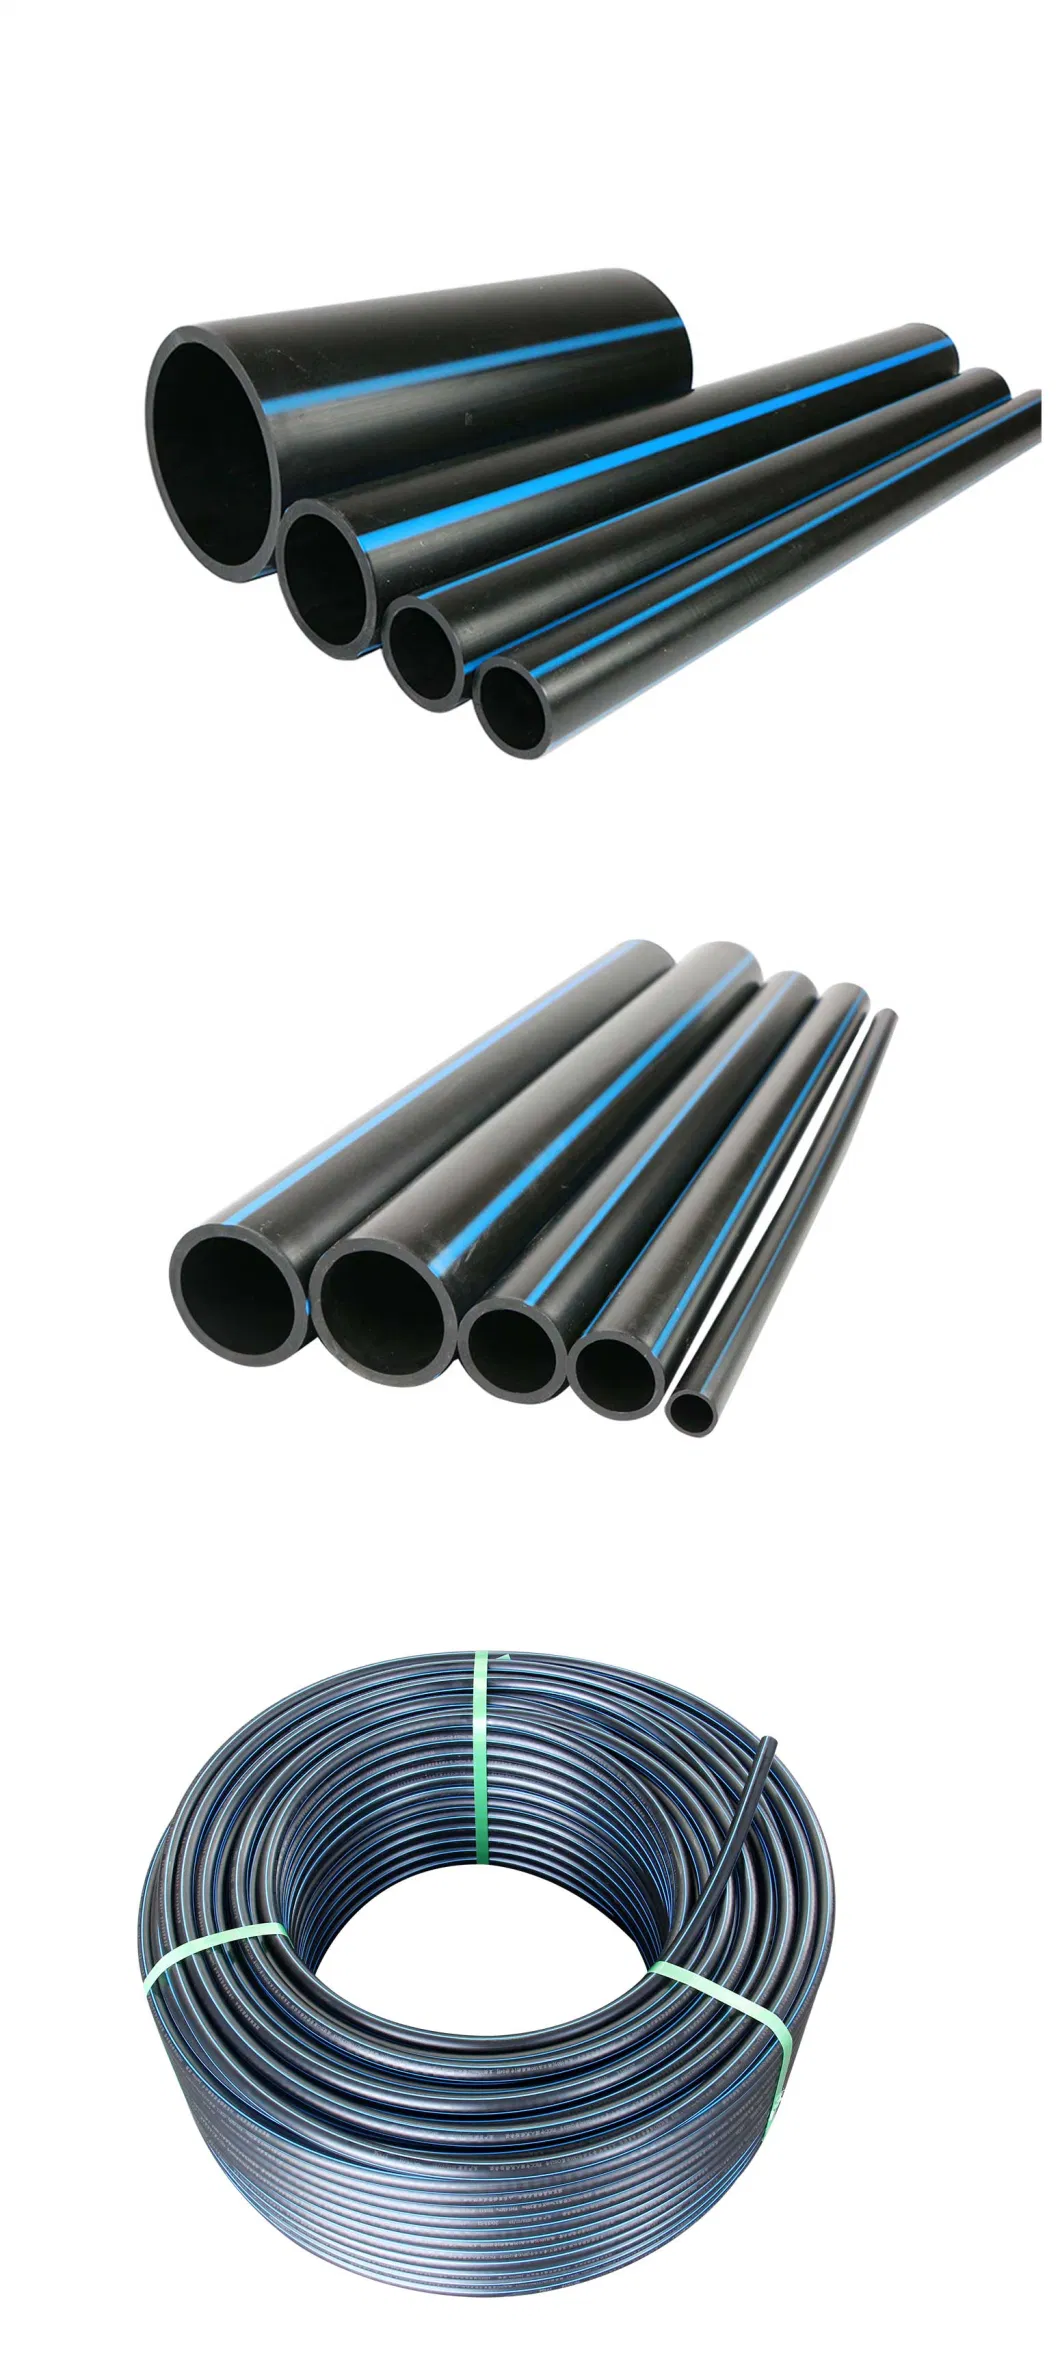 High Quality Durable Pipes HDPE Pipe 50mm SDR11 Pn16 HDPE Tube Water Pipe Wholesale Price